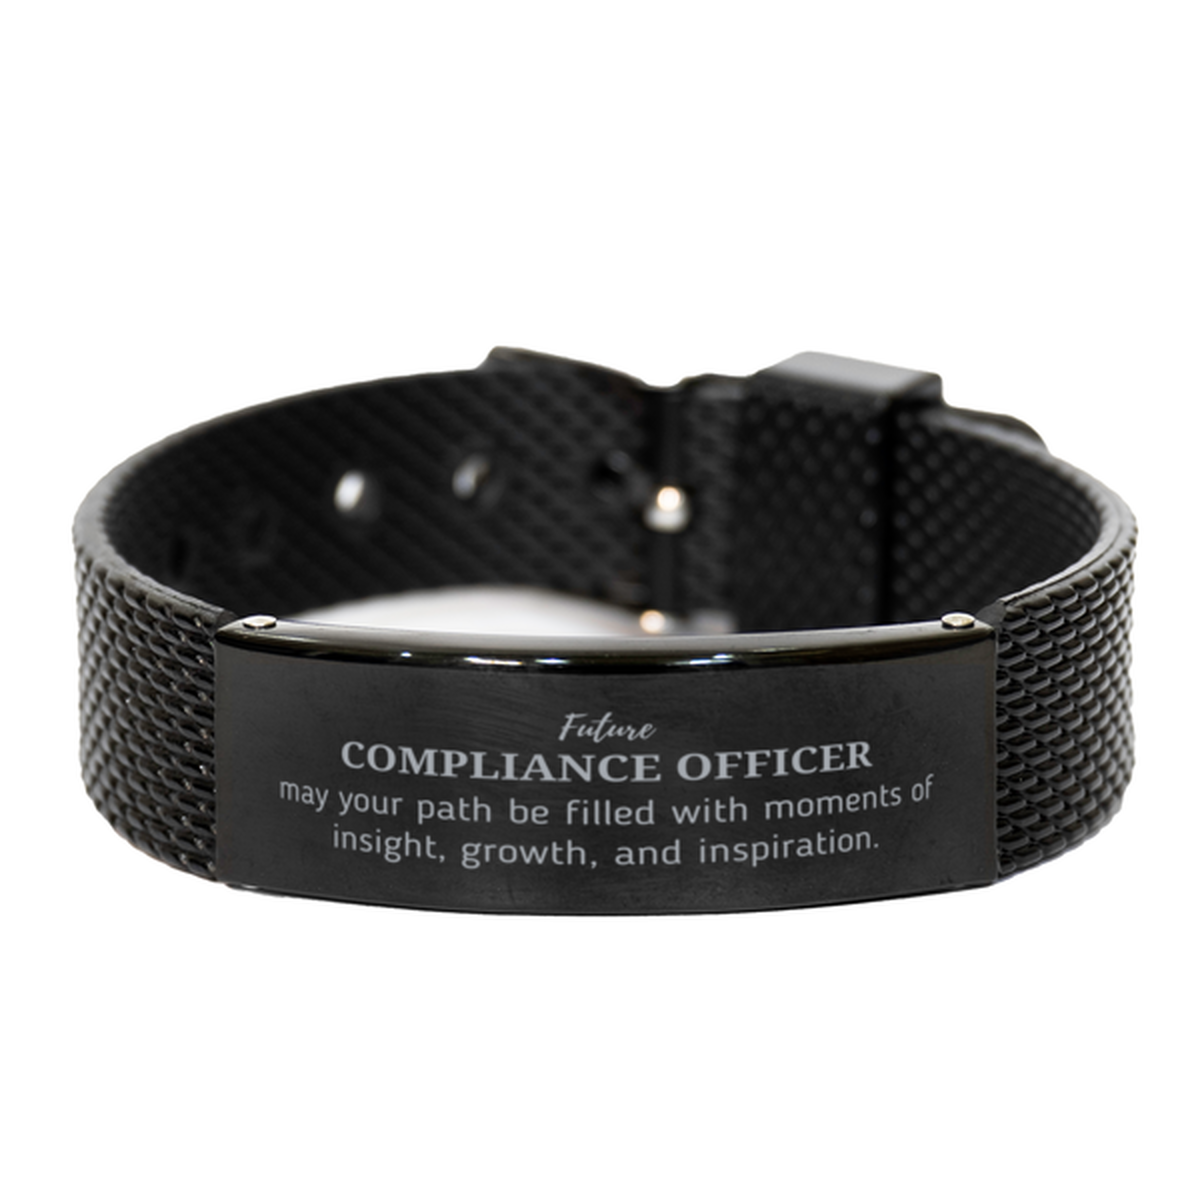 Future Compliance Officer Gifts, May your path be filled with moments of insight, Graduation Gifts for New Compliance Officer, Christmas Unique Black Shark Mesh Bracelet For Men, Women, Friends